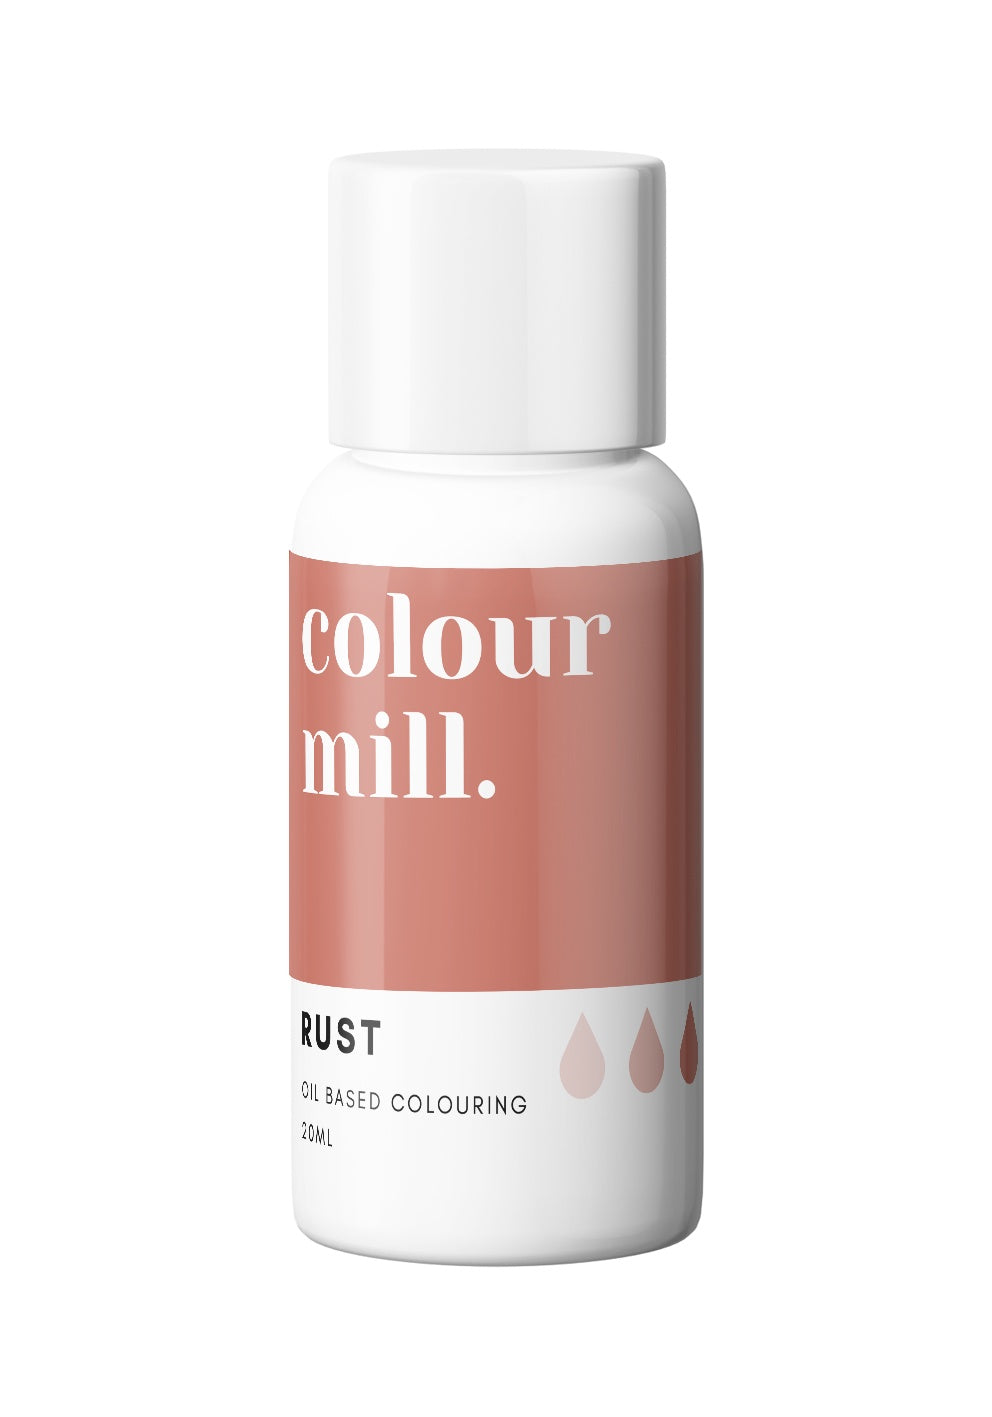 Colour Mill Oil Based Colouring 20ml - Rust